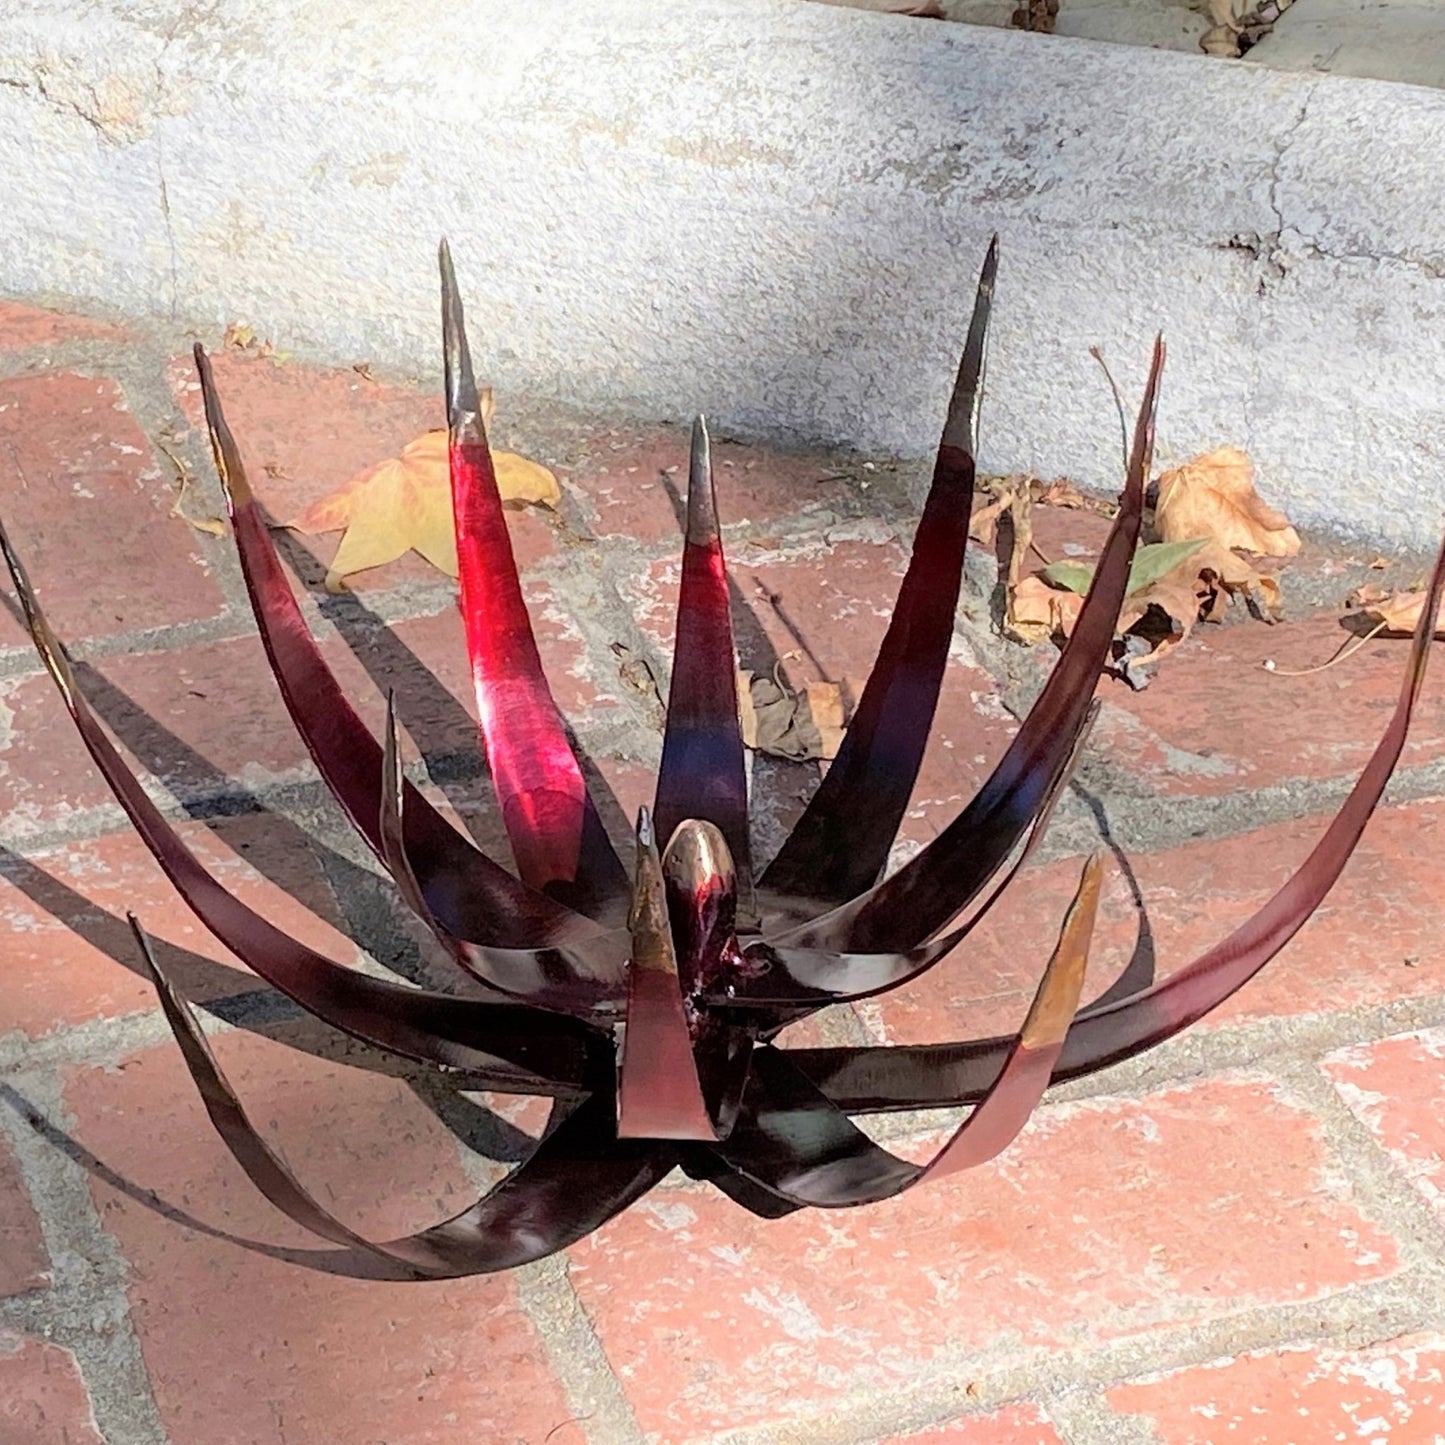 The Red Dwarf Sculpture from Succulent Metals Welded Artistry HANDMADE ARTISAN METALWORK Fusion of Strength & Beauty